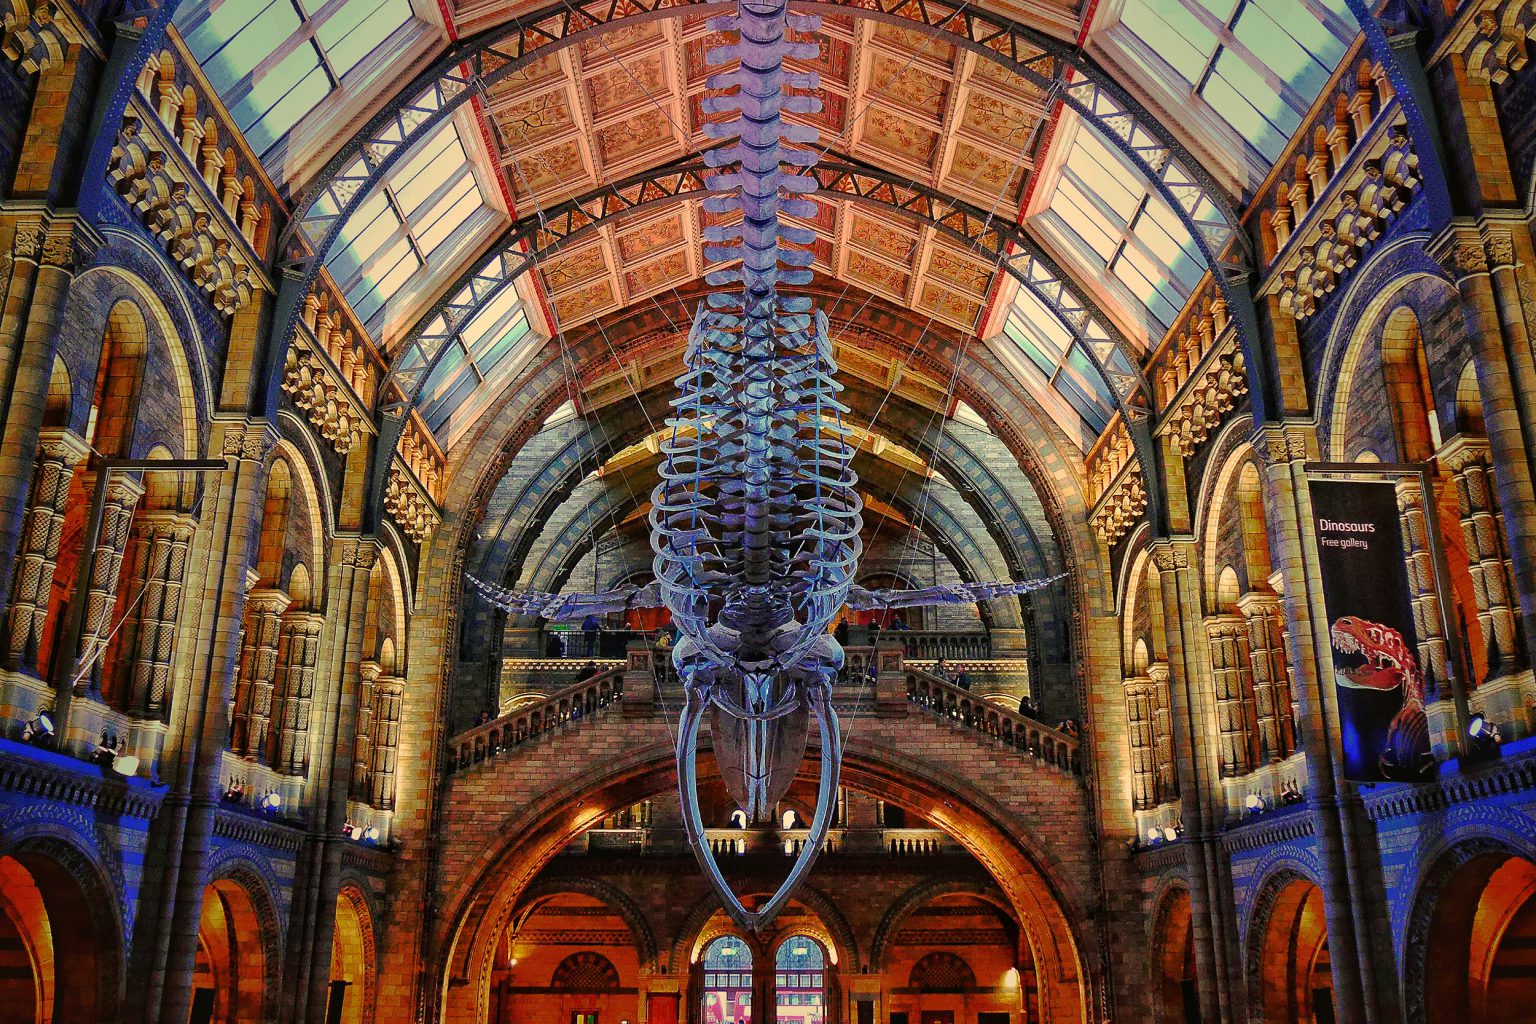 Photograph of a Blue Whale Skeleton at The Natural History Museum